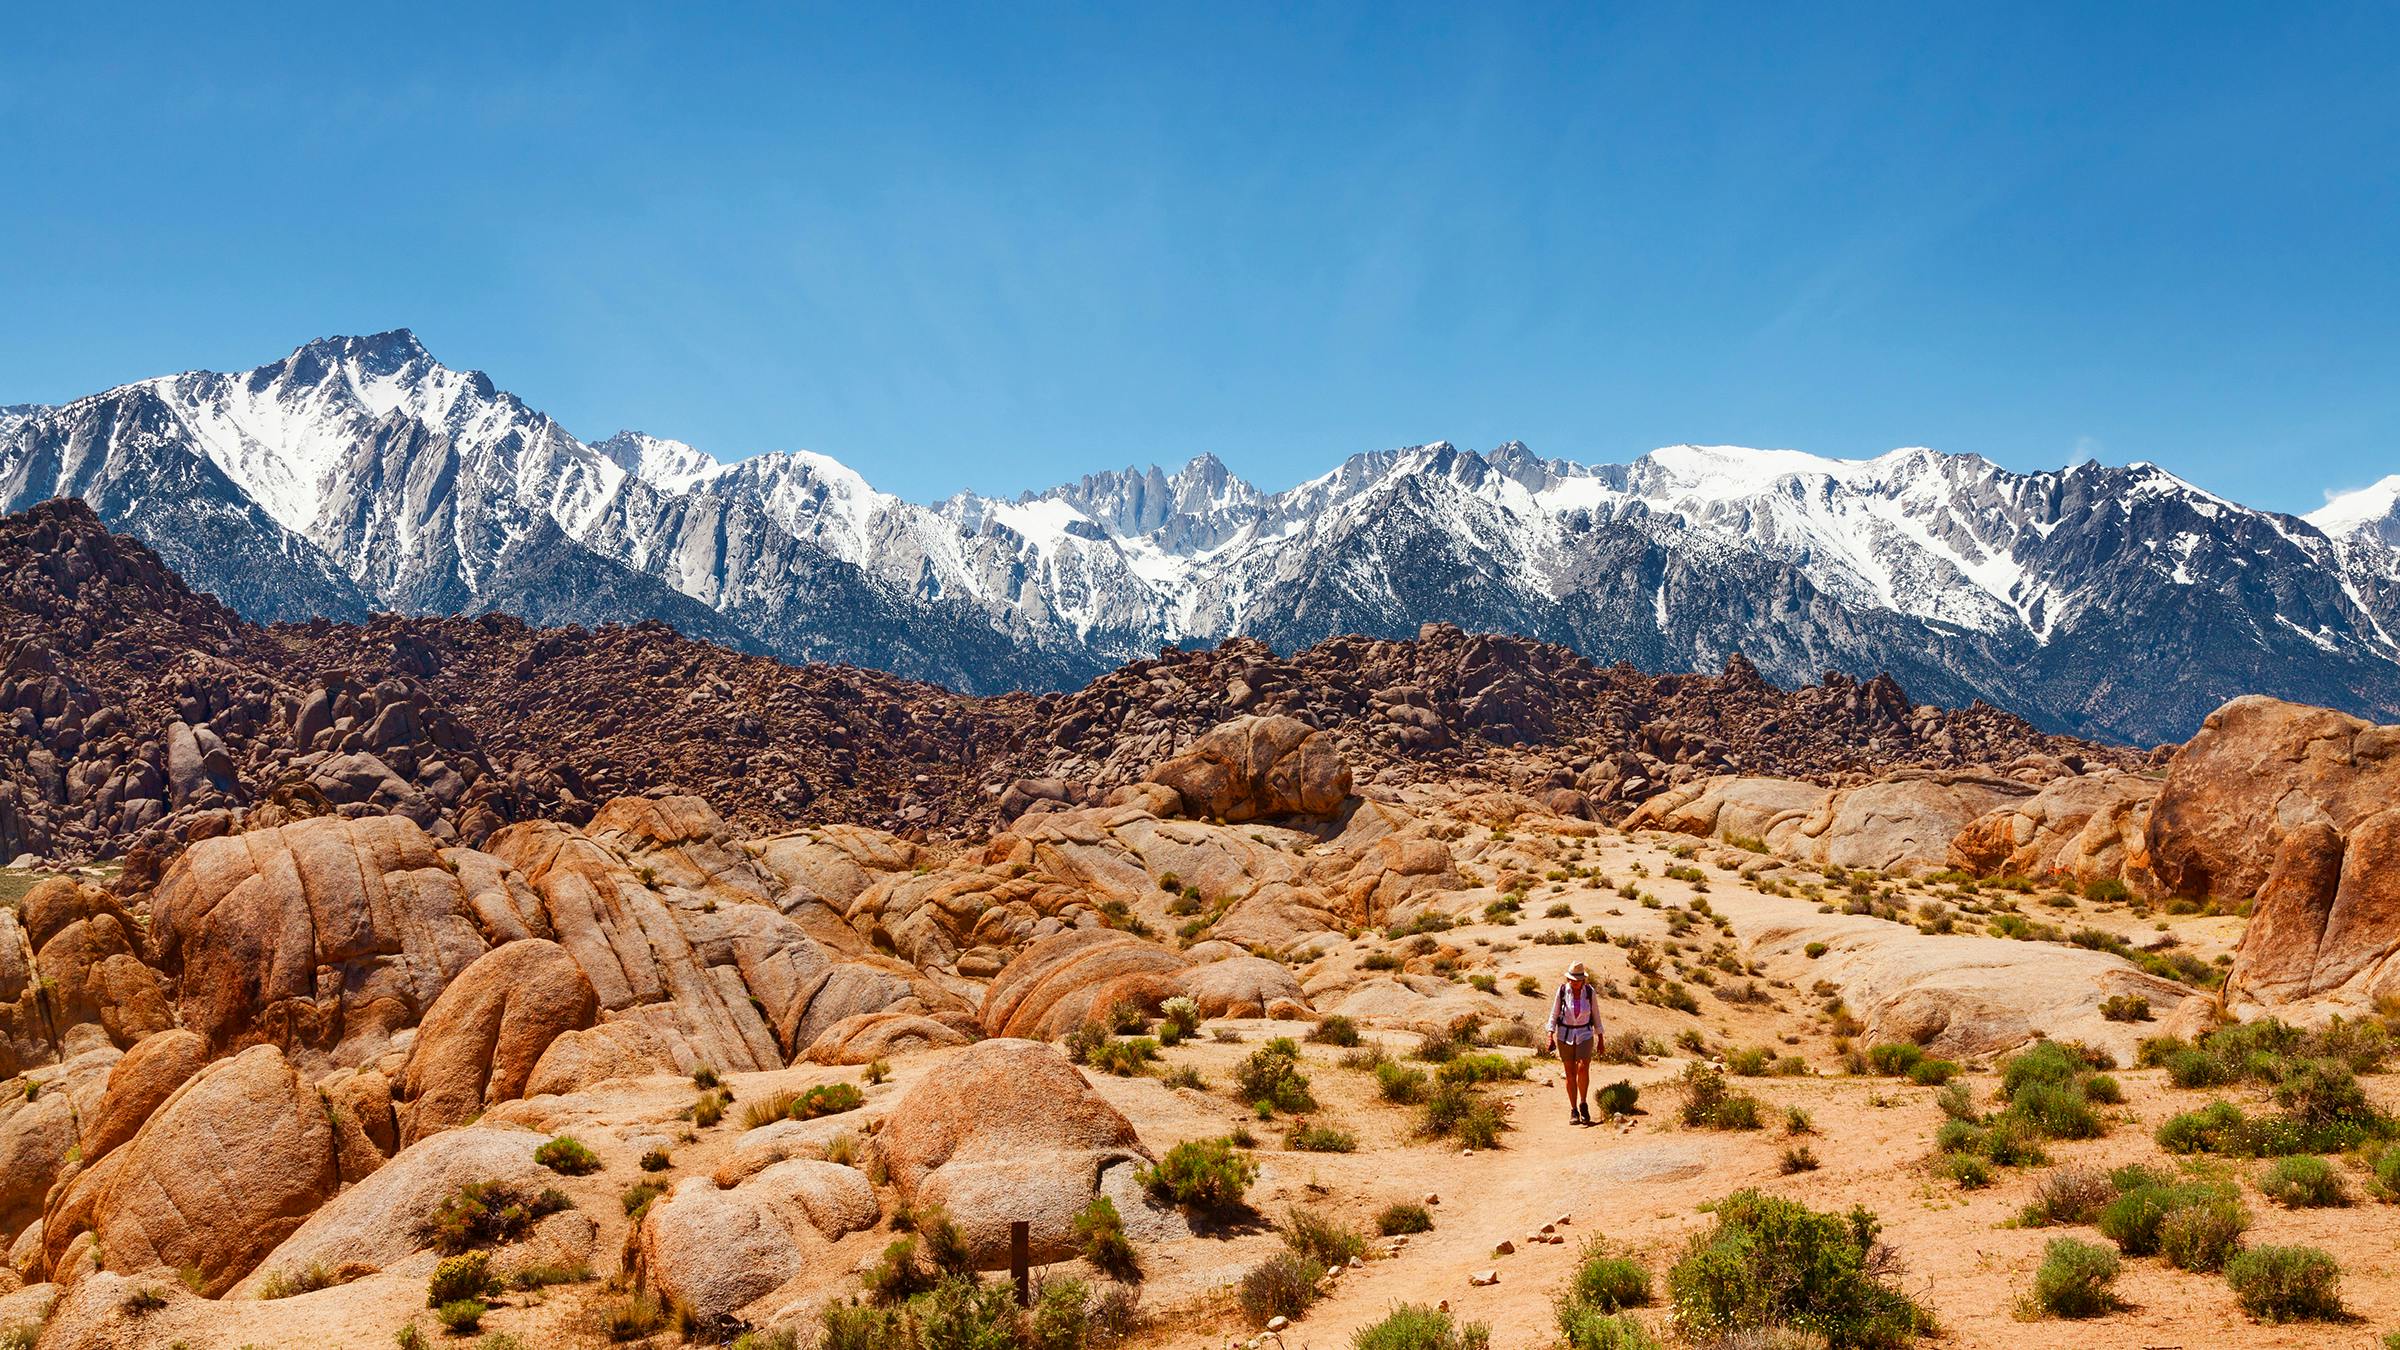 Tan rock formations in Alabama Hills with blue sky and snow-covered mountains in background